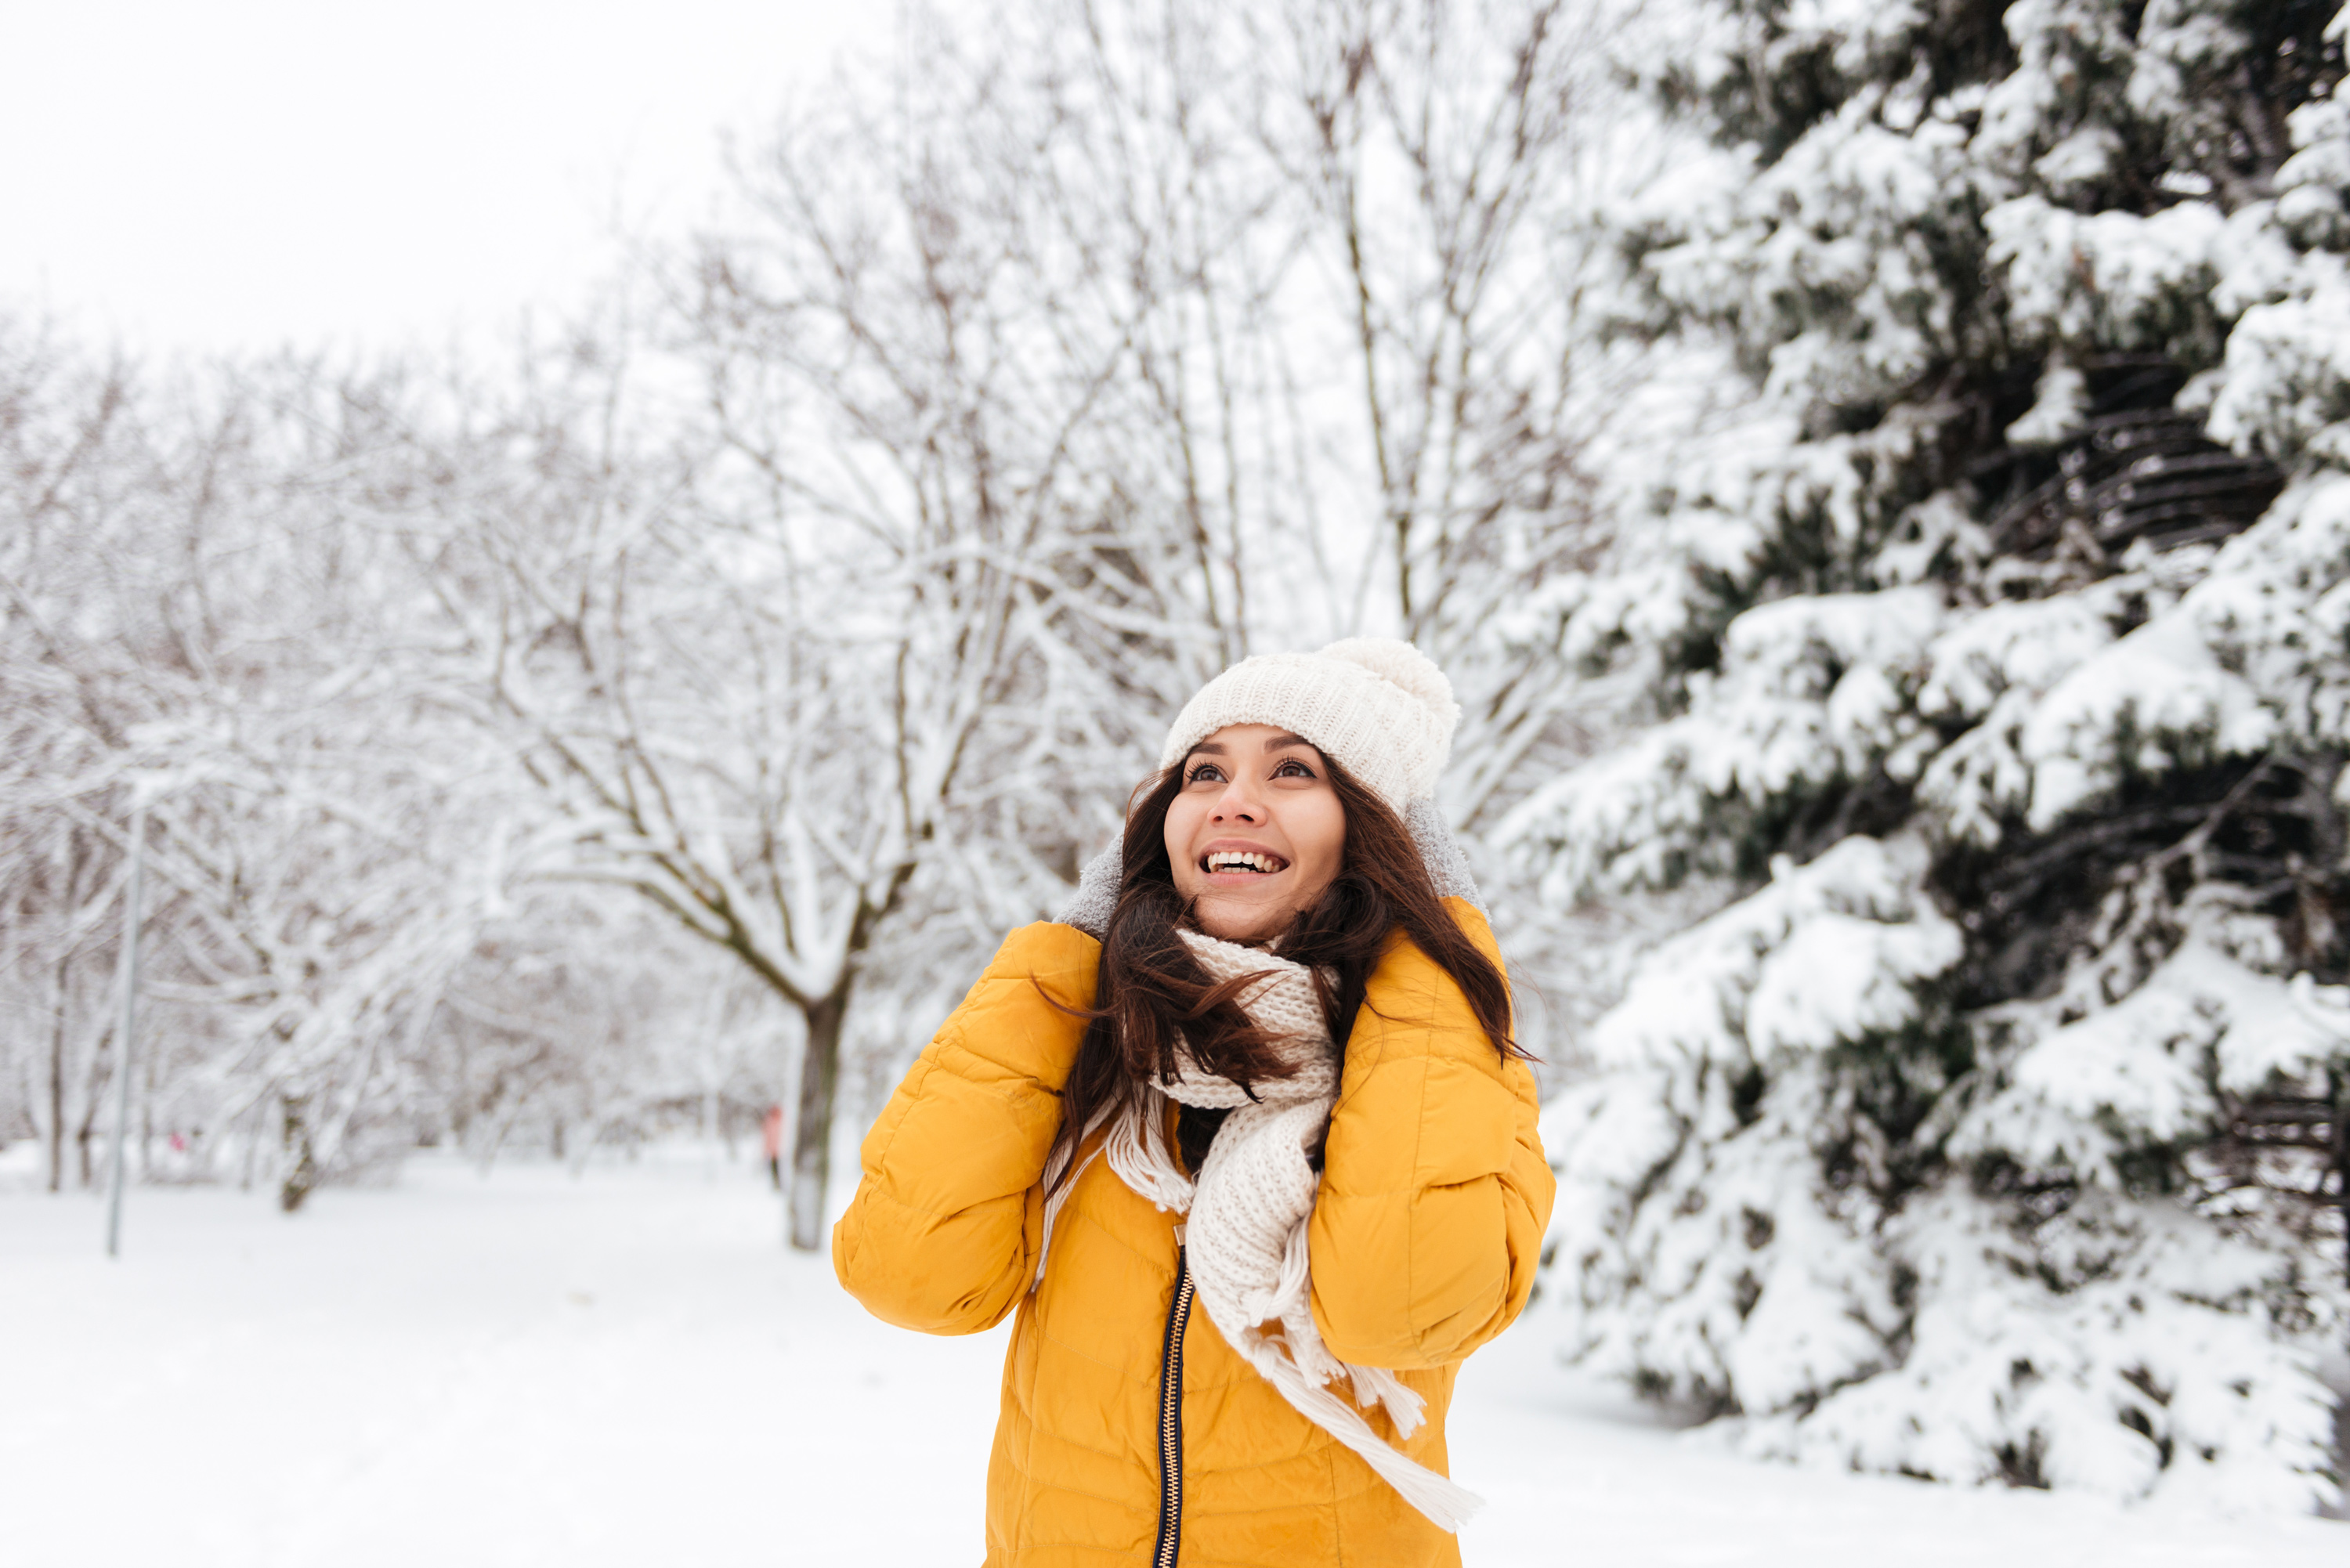 A girl in yellow jacket and white hat smiling in snow